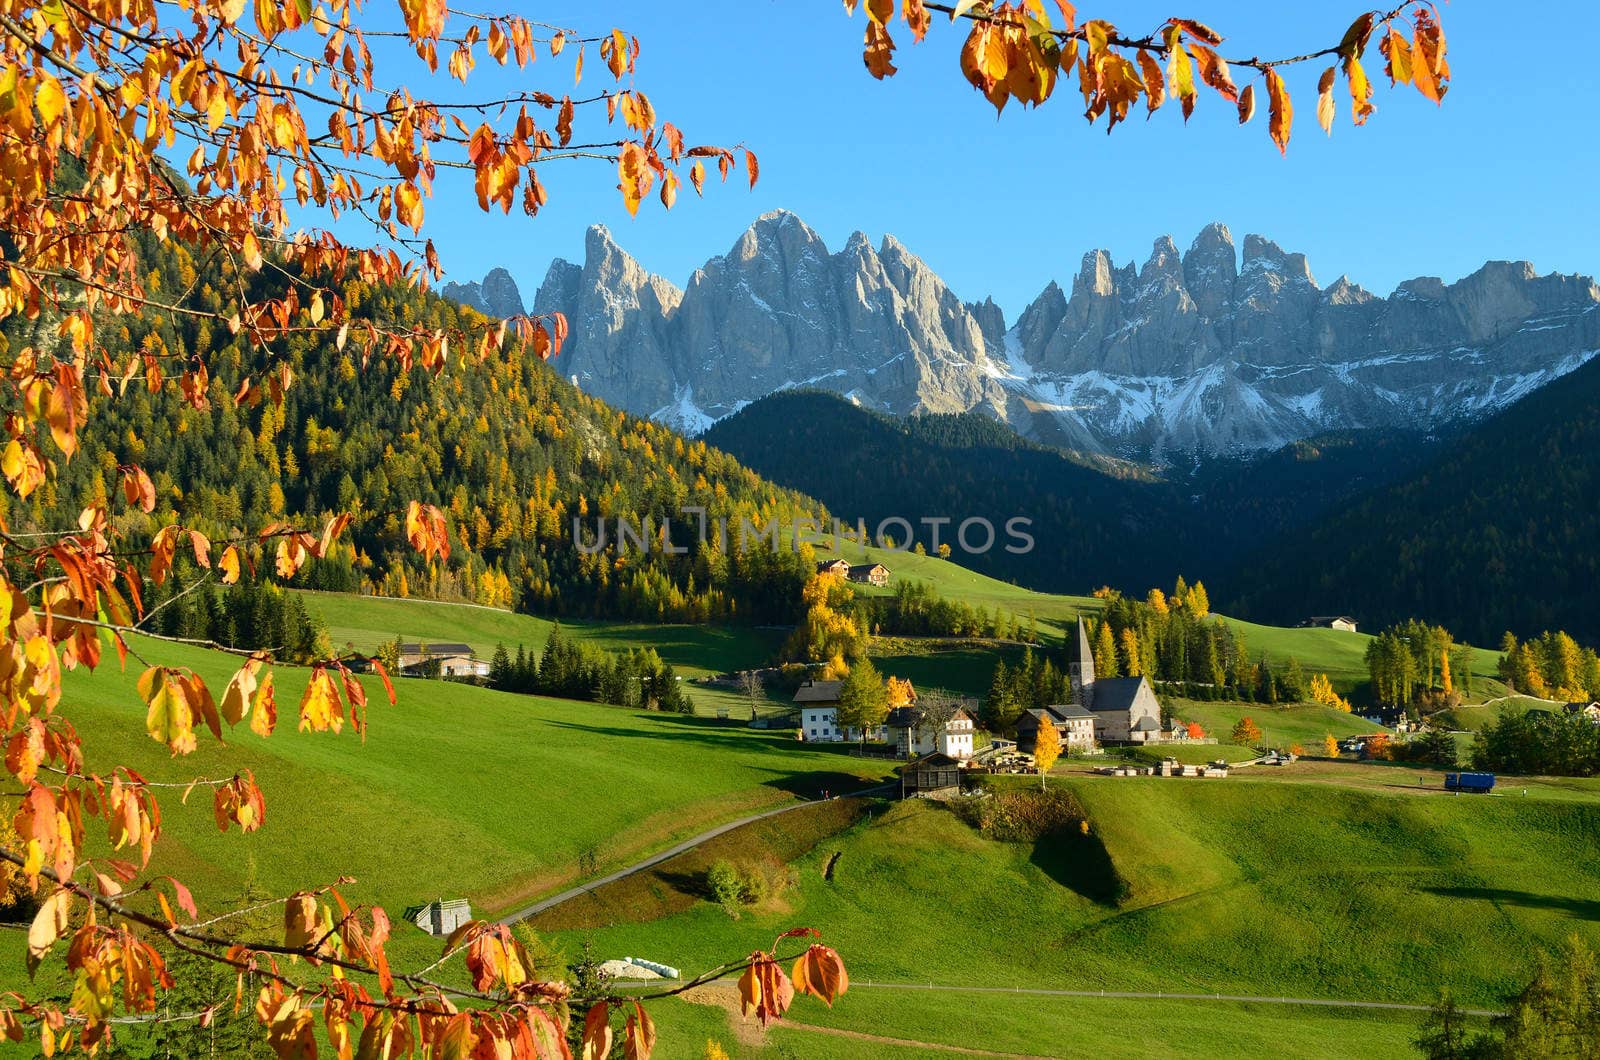 St. Magdalena or Santa Maddalena with its characteristic church in front of the Geisler or Odle Dolomites mountain peaks in the Val di Funes (Villnosstal) in Italy in autumn.